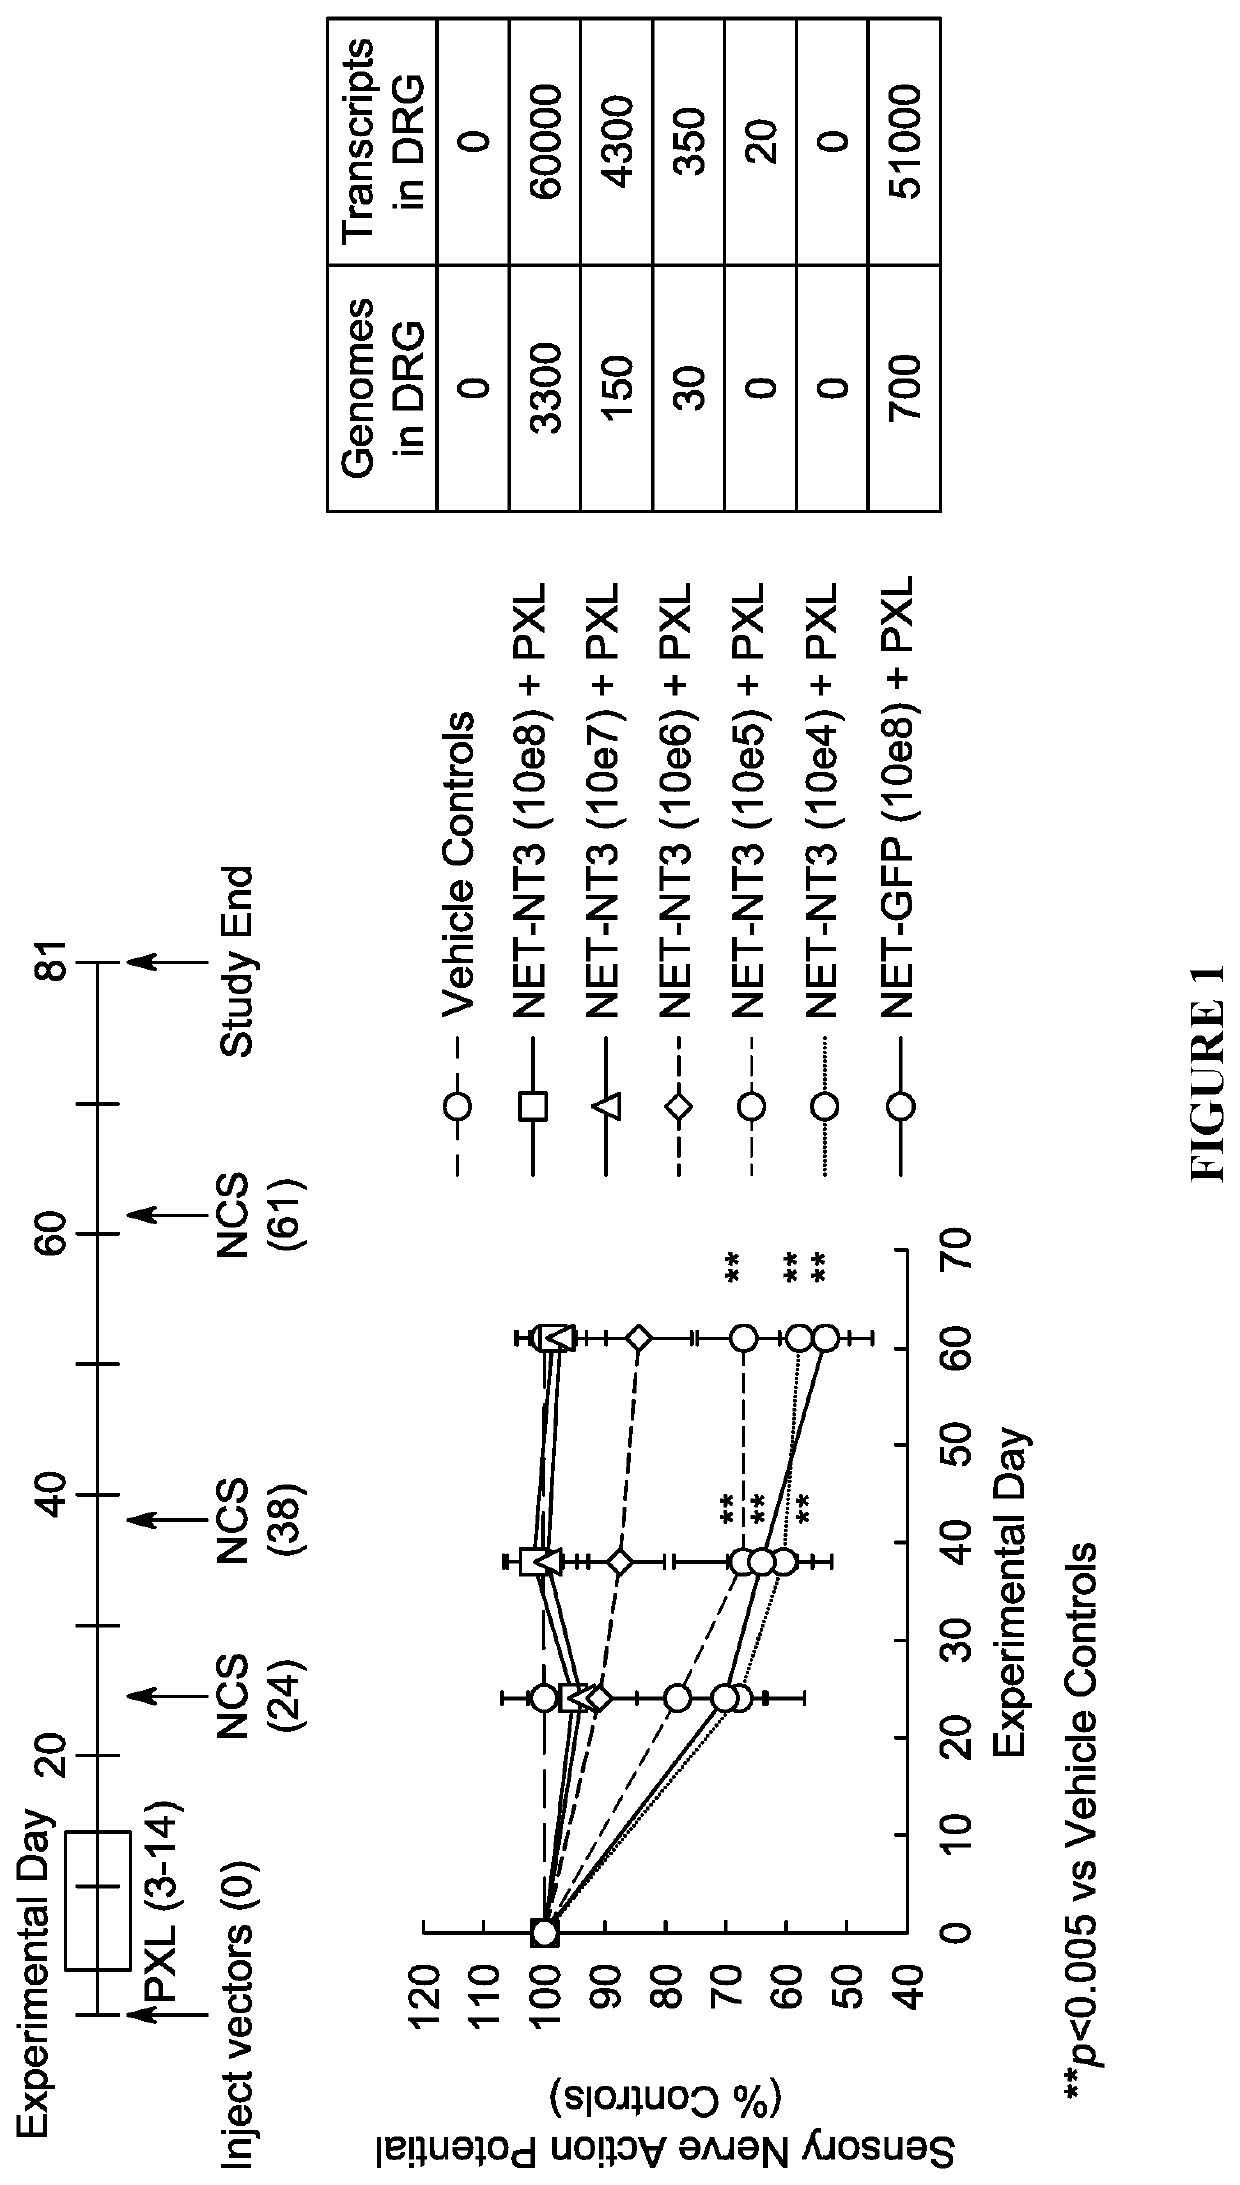 HSV vectors for delivery of NT3 and treatment of CIPN